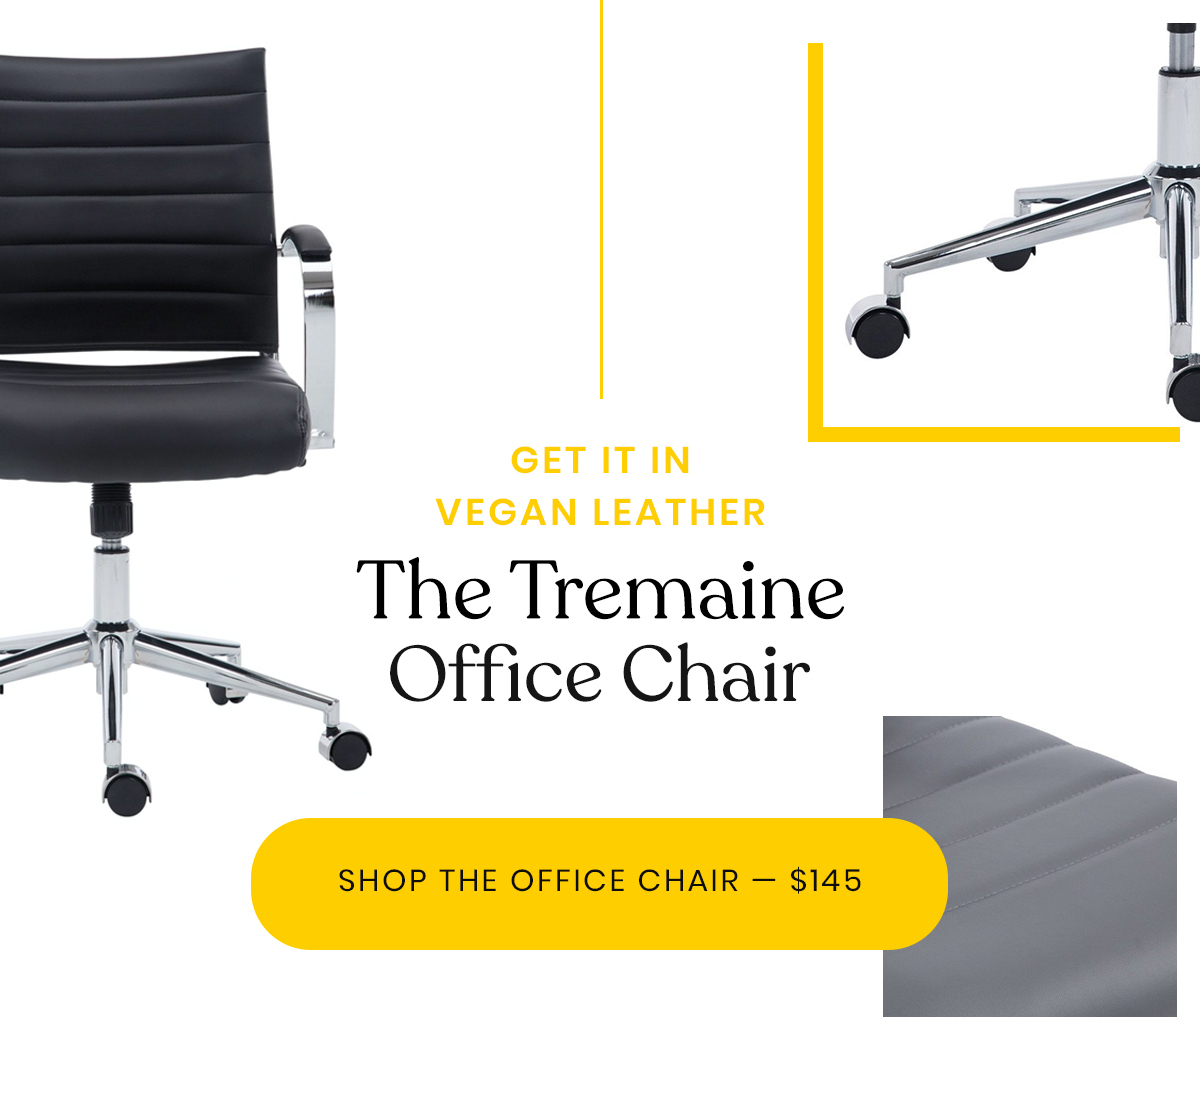 Get It In Vegan Leather | The Tremaine Office Chair | Shop The Office Chair - $145